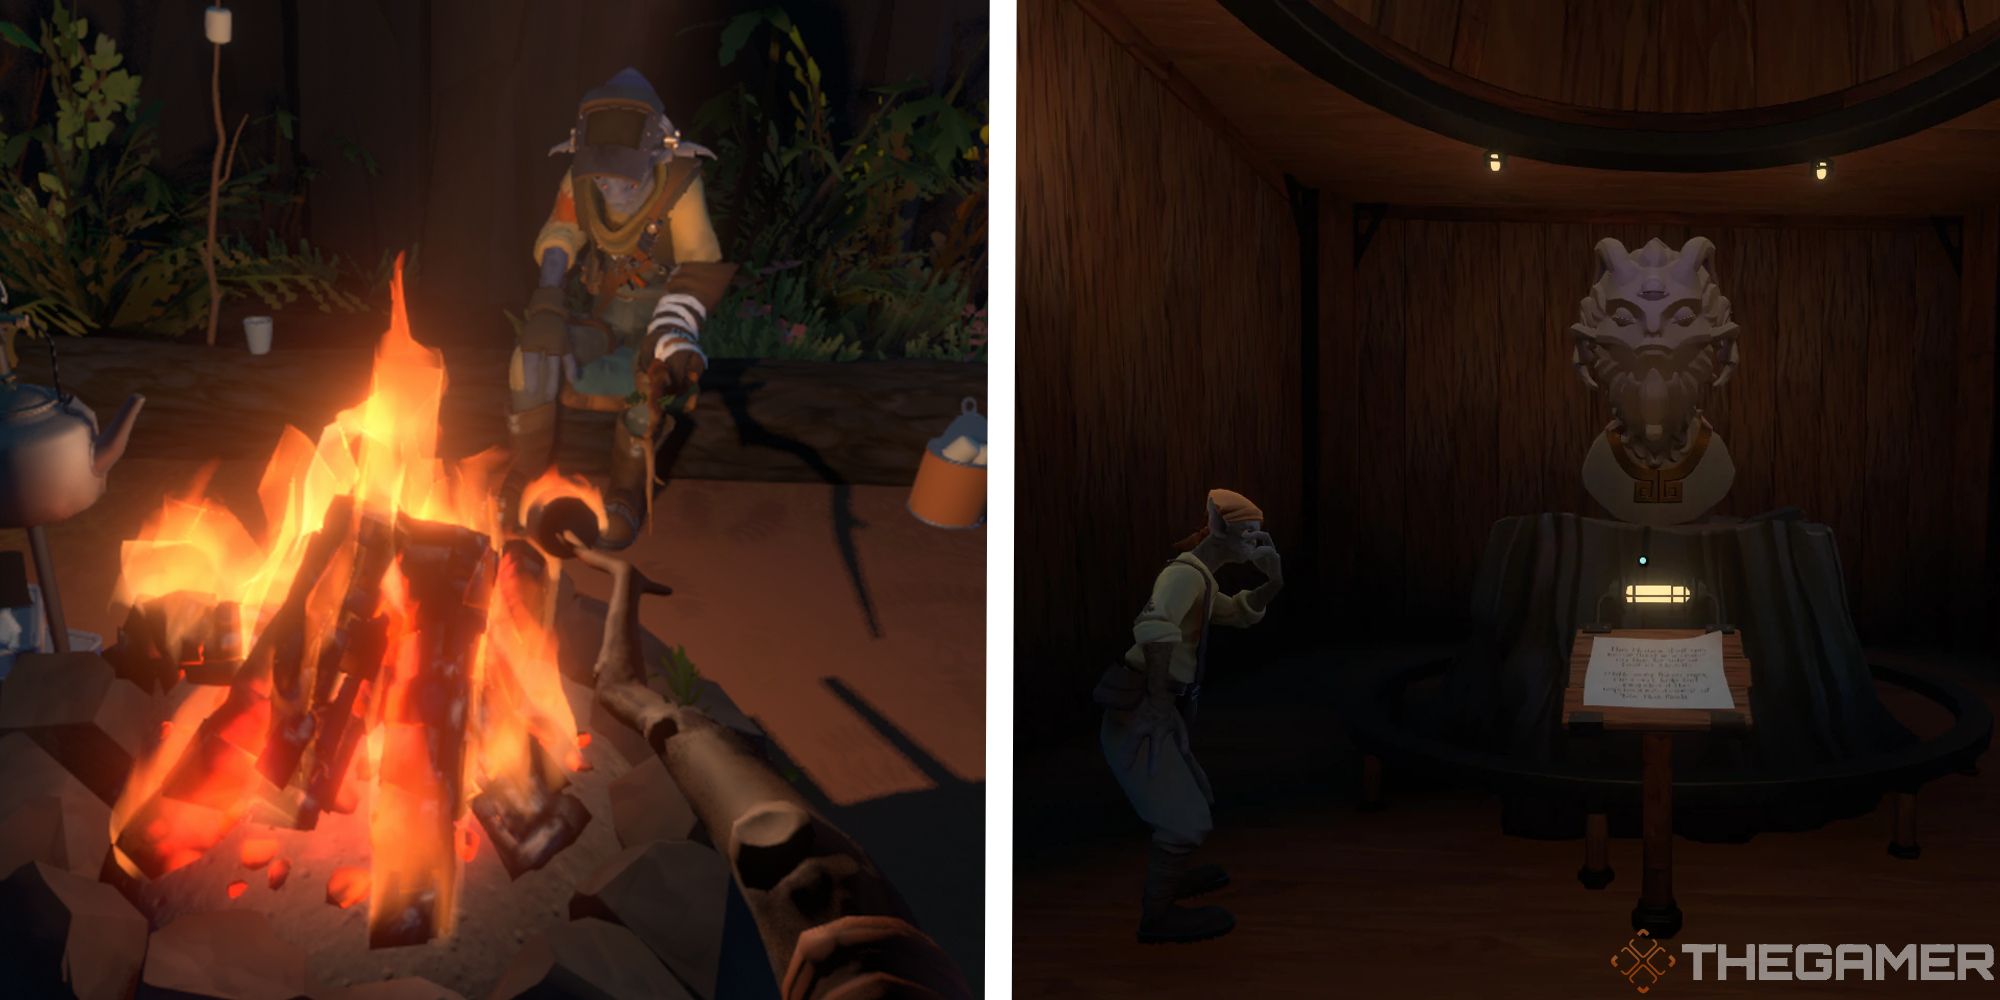 image of player roasting marshmallow at campfire next to image of statue in front of observatory entrance